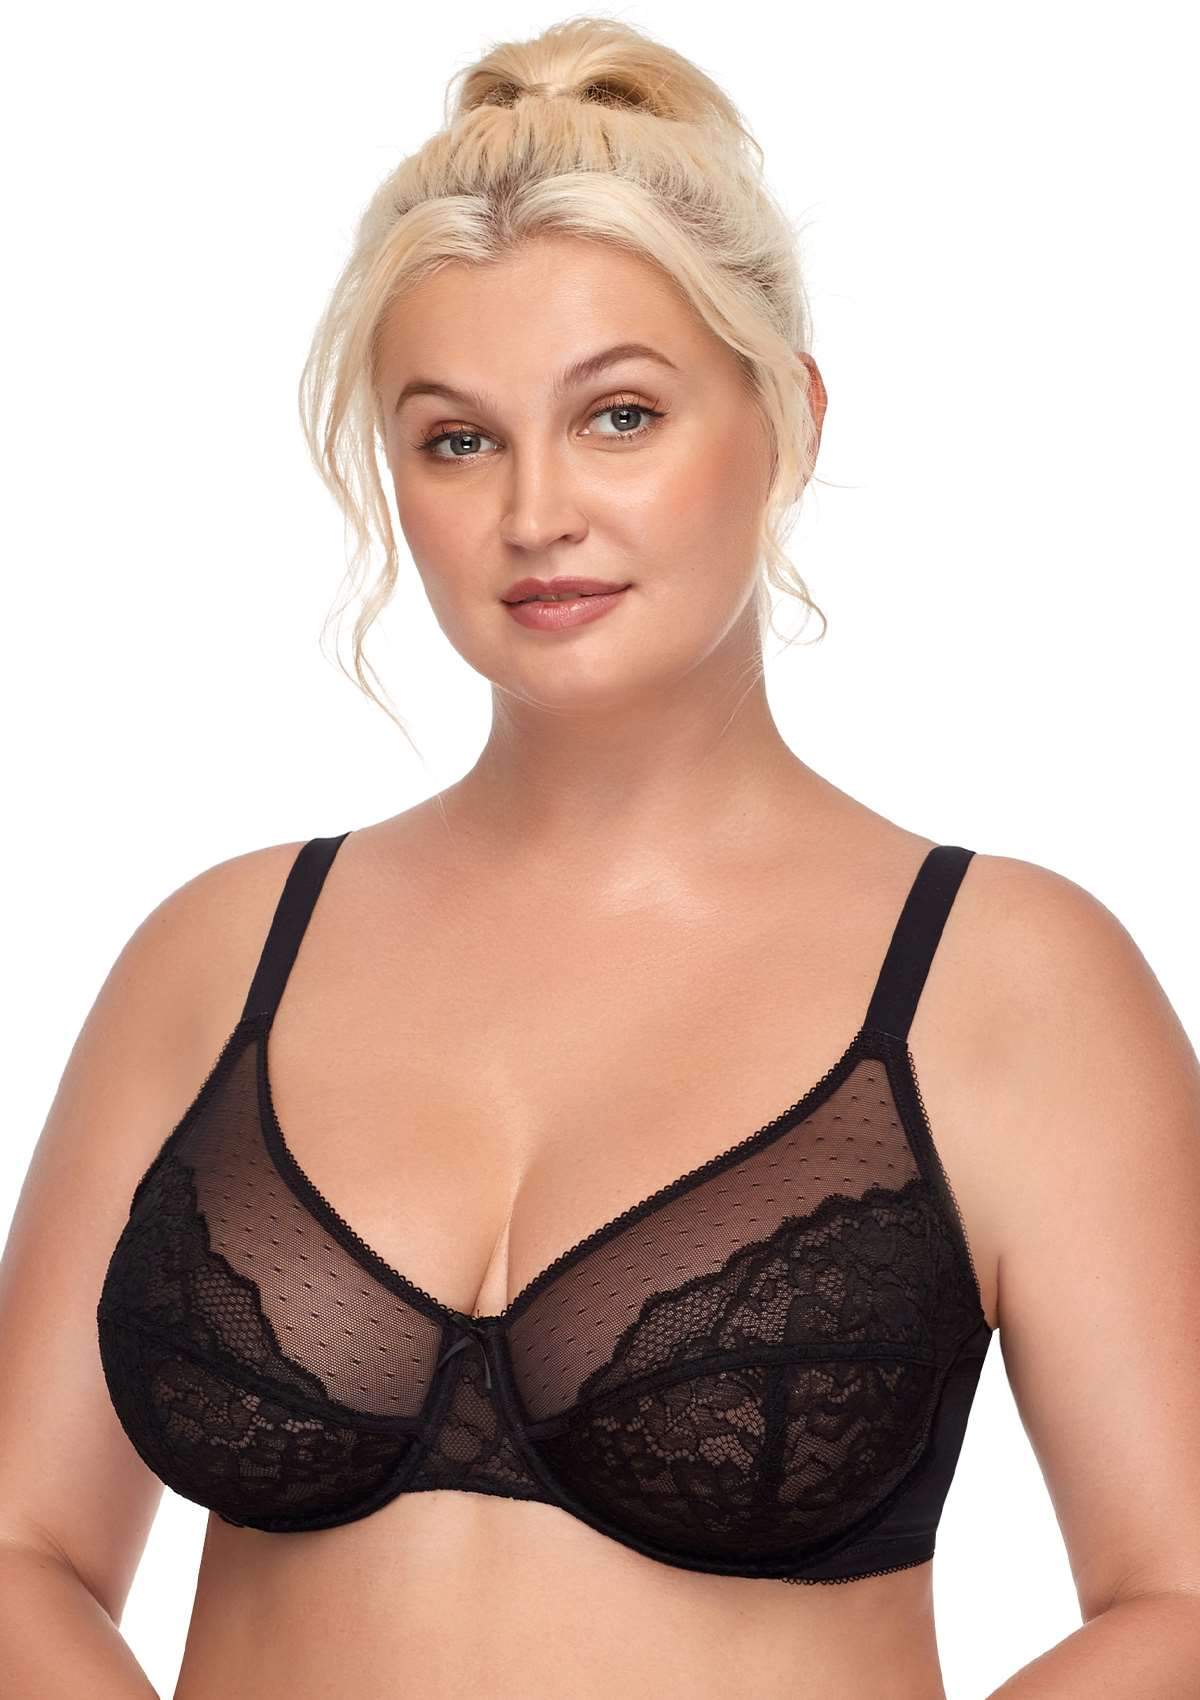 HSIA Enchante Lace Wire Bra For Lifting And Separating Large Breasts - Black / 34 / D